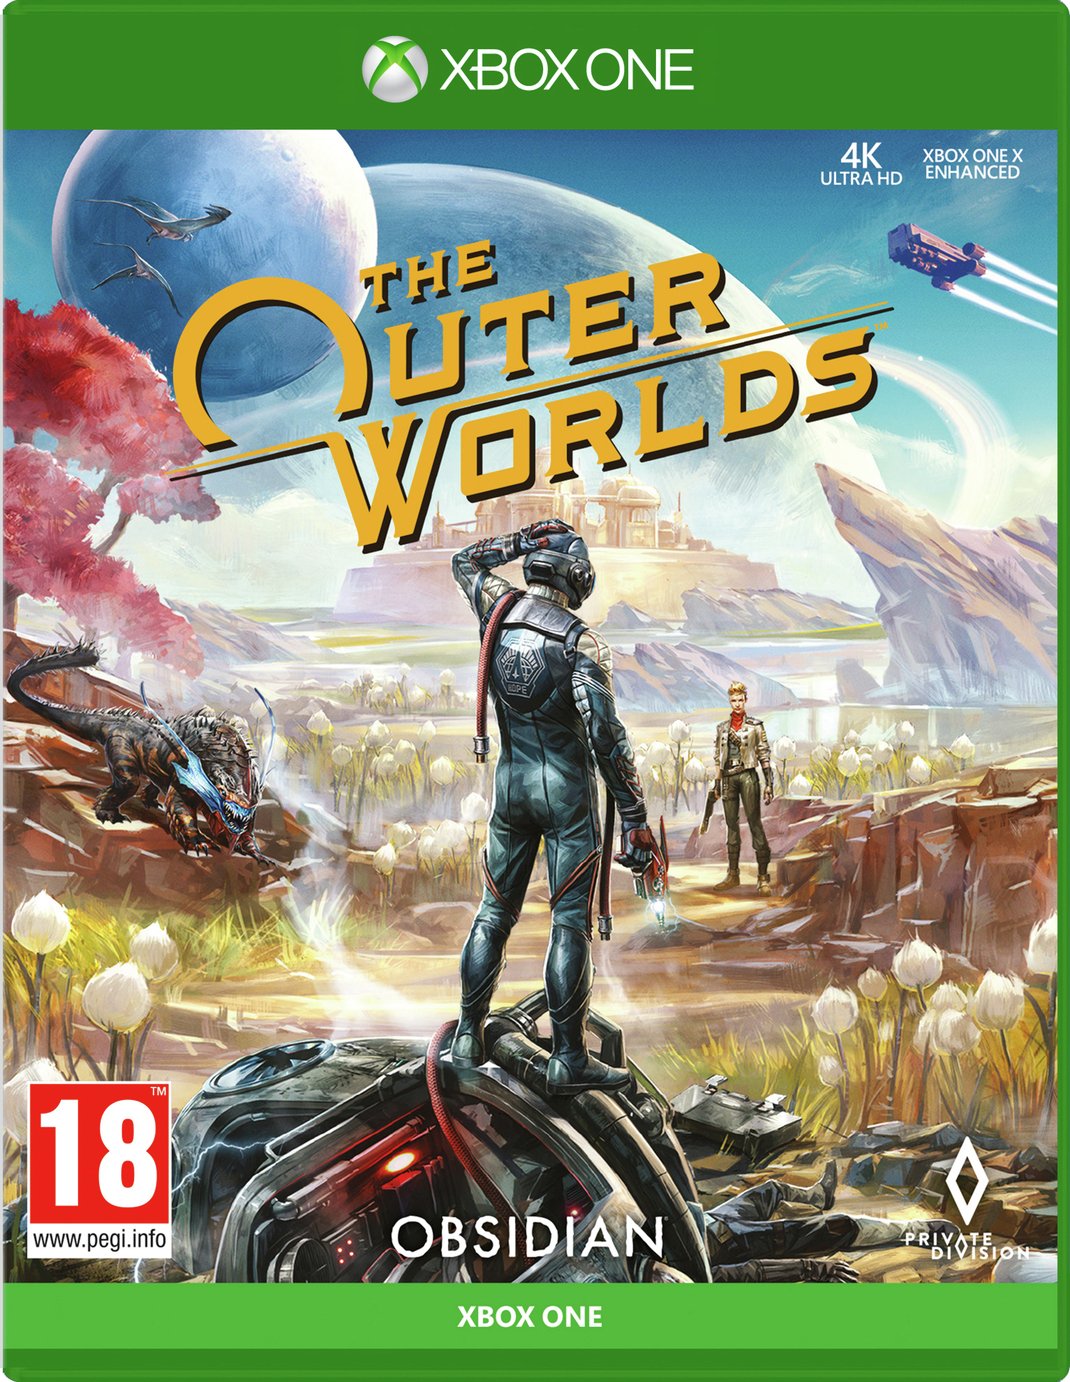 The Outer Worlds Xbox One Game Review